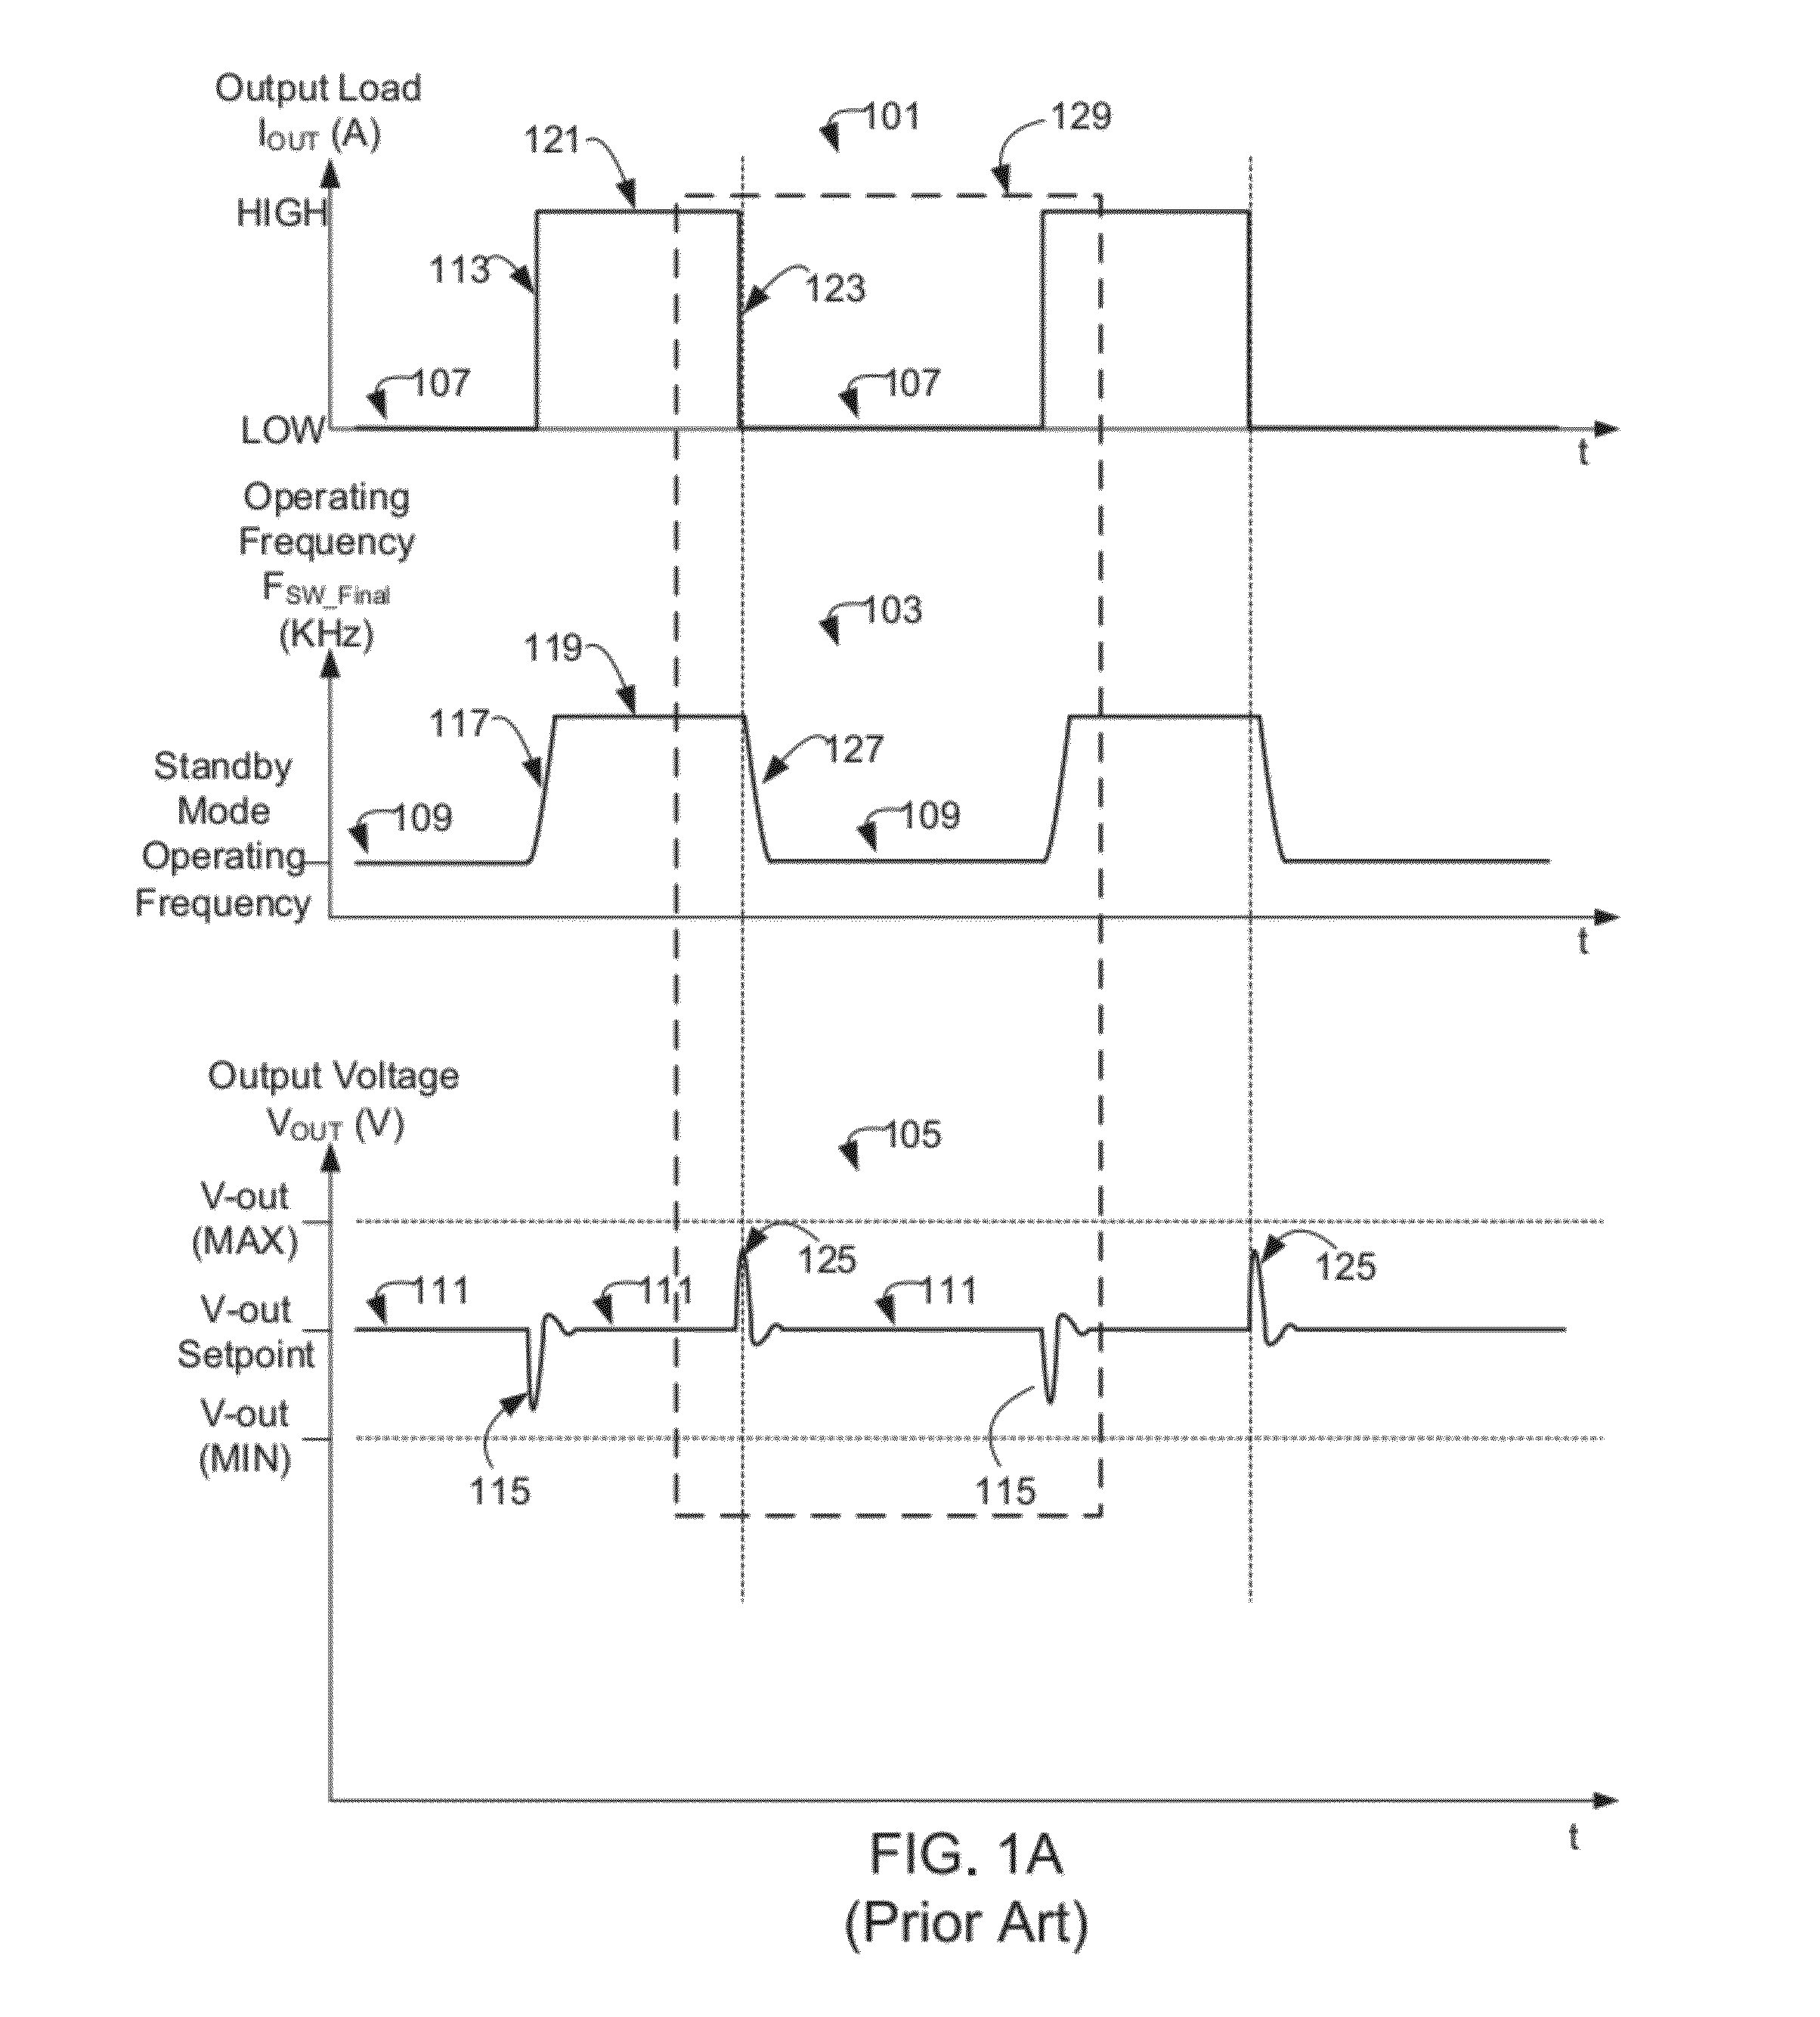 Switching power converter having optimal dynamic load response with ultra-low no load power consumption